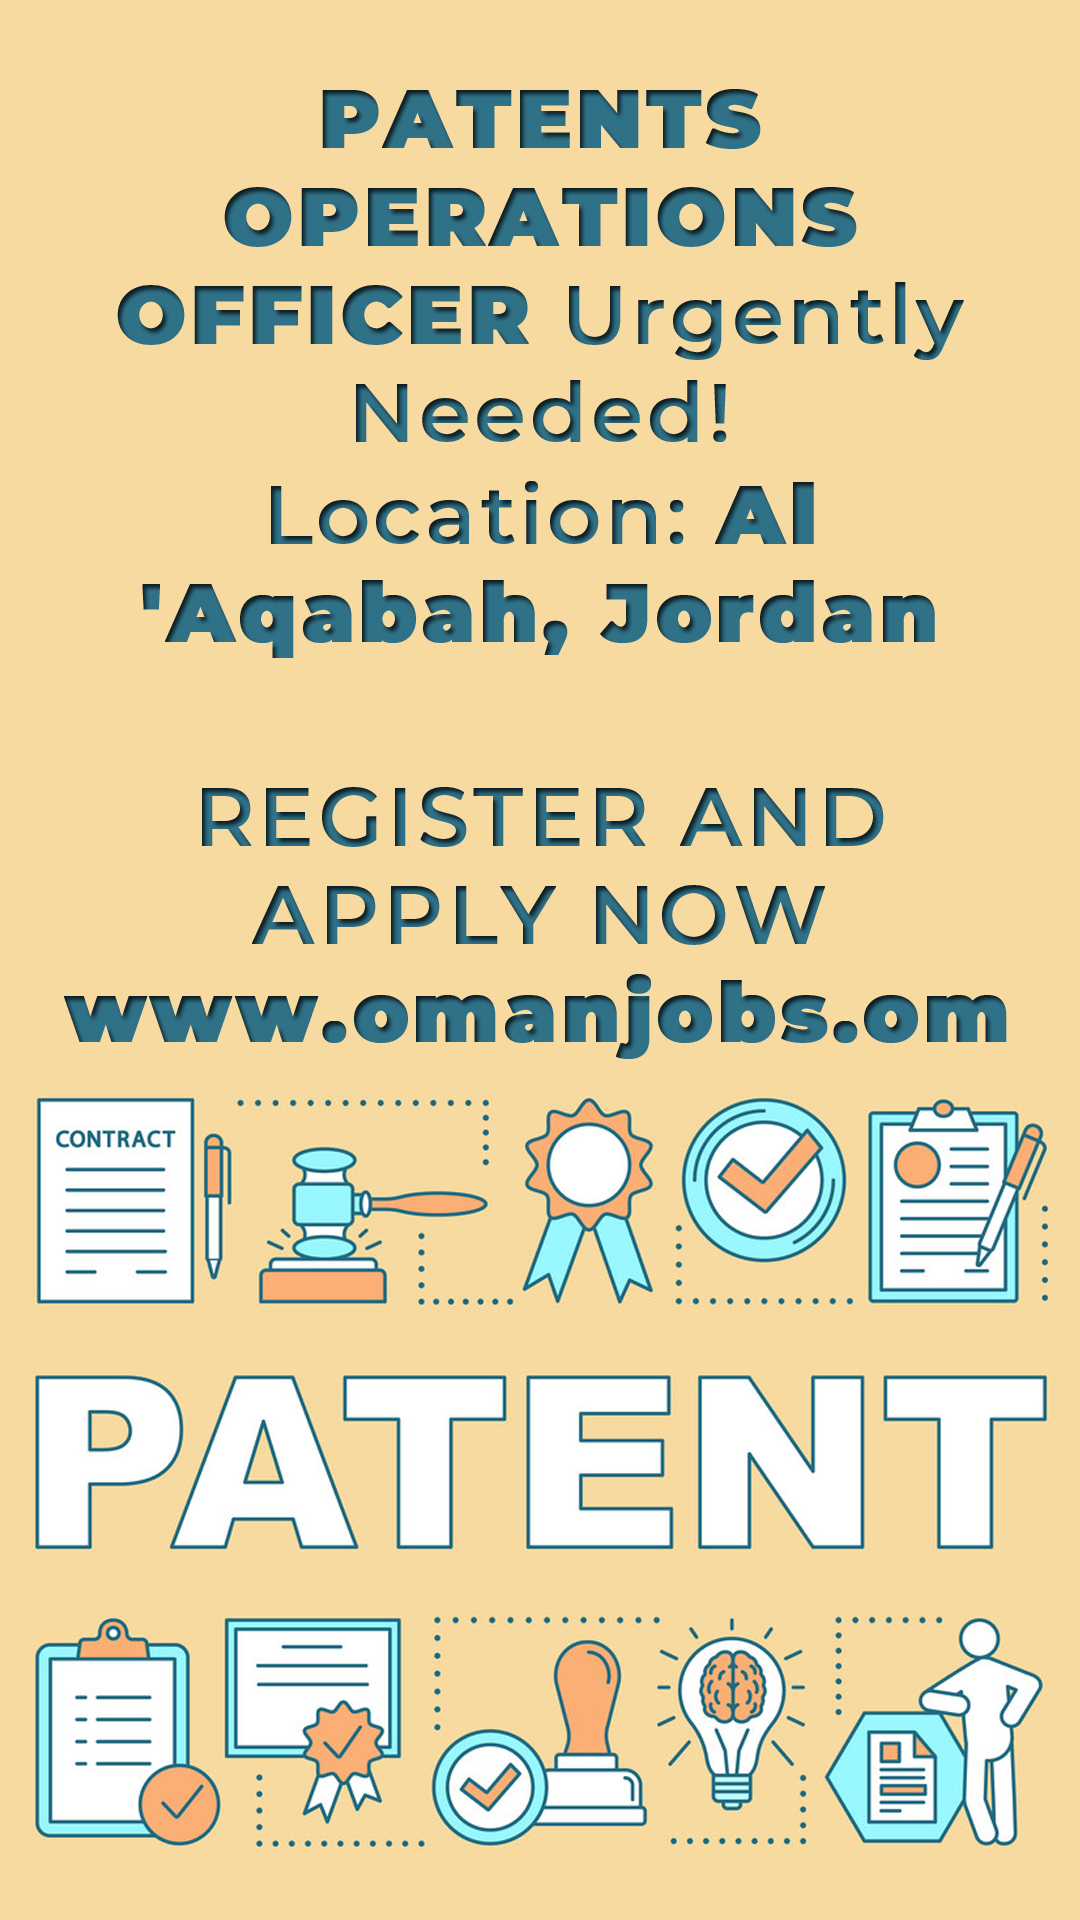 Hiring PATENTS OPERATIONS OFFICER